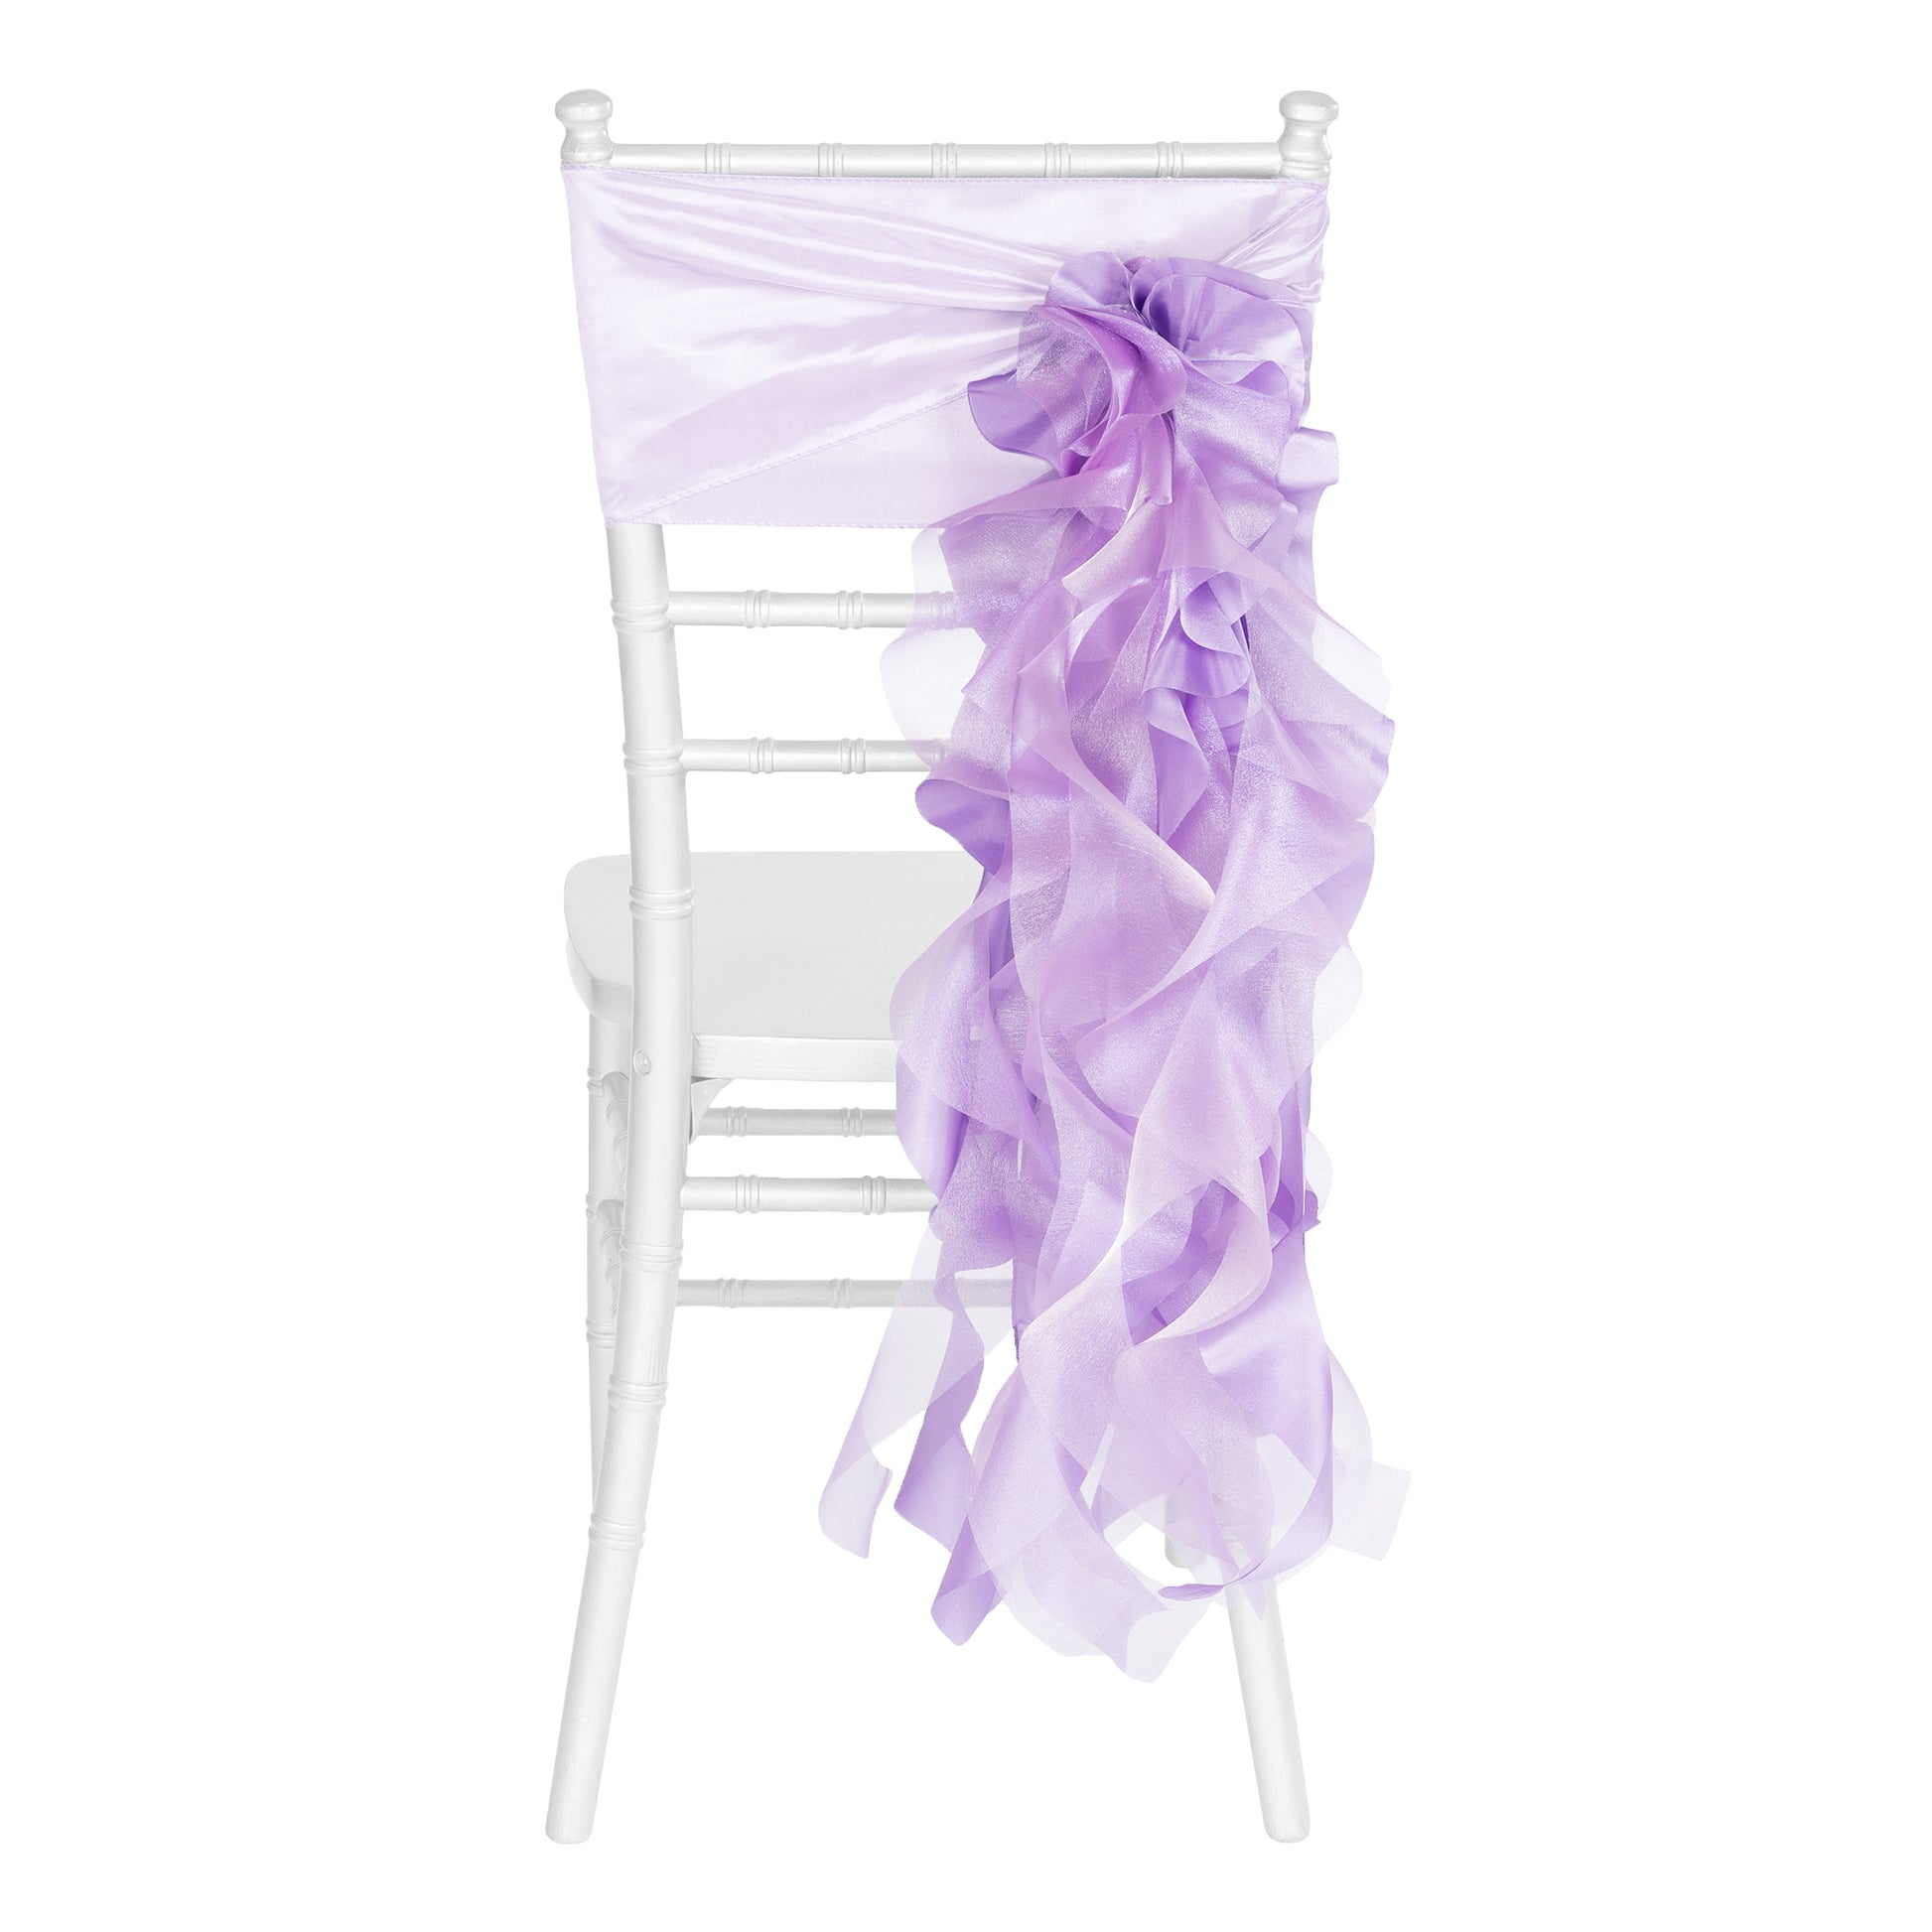 Curly Willow Chair Sash - Victorian Lilac/Wisteria - CV Linens